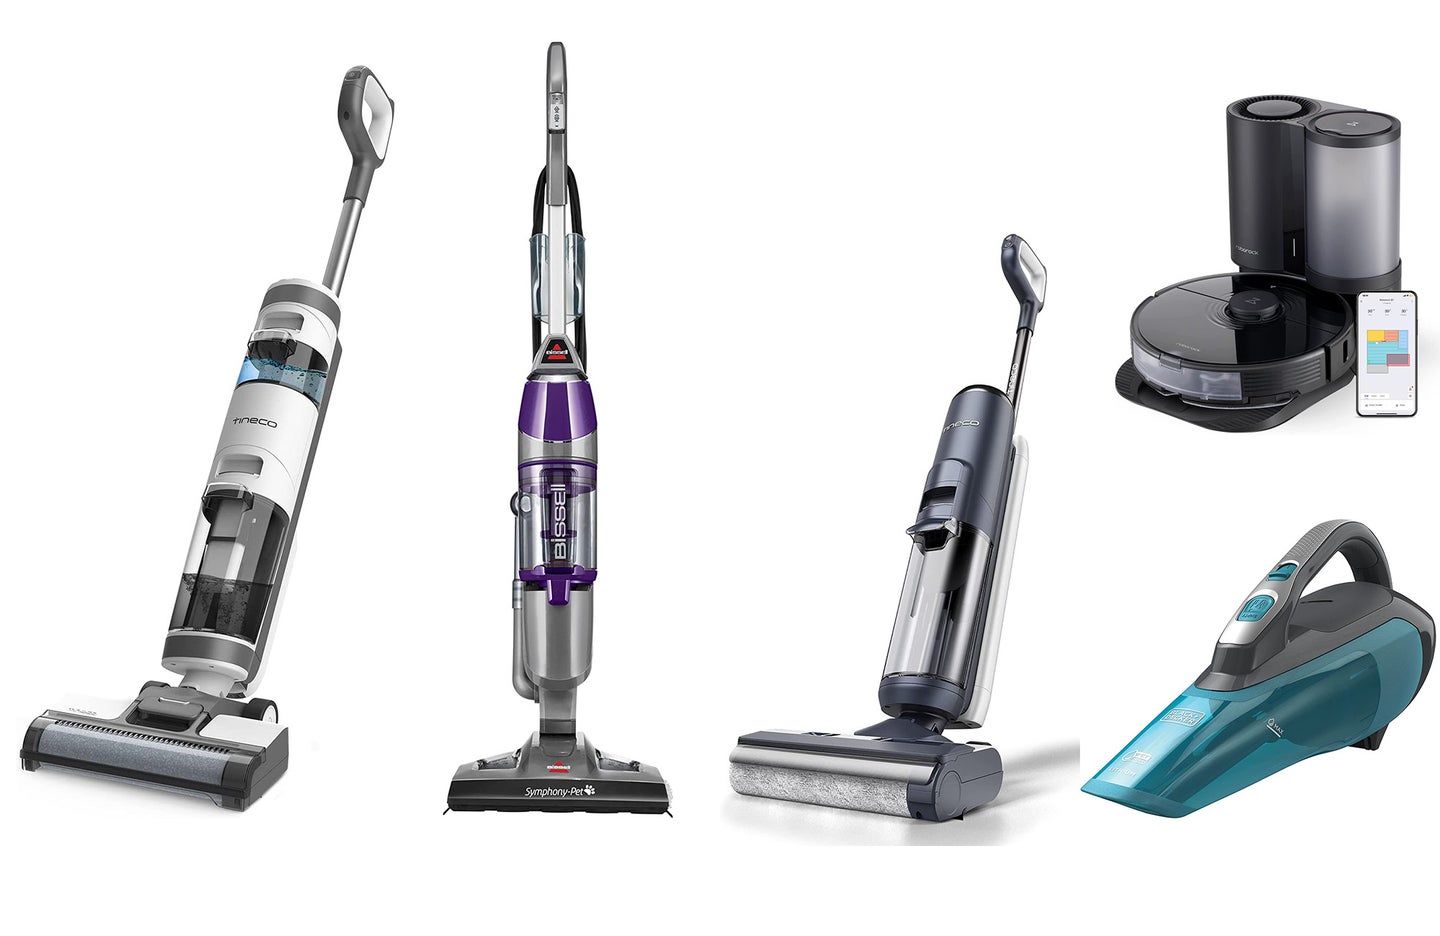 The best vacuum-mop combos perform double duty to make cleaning up easier.